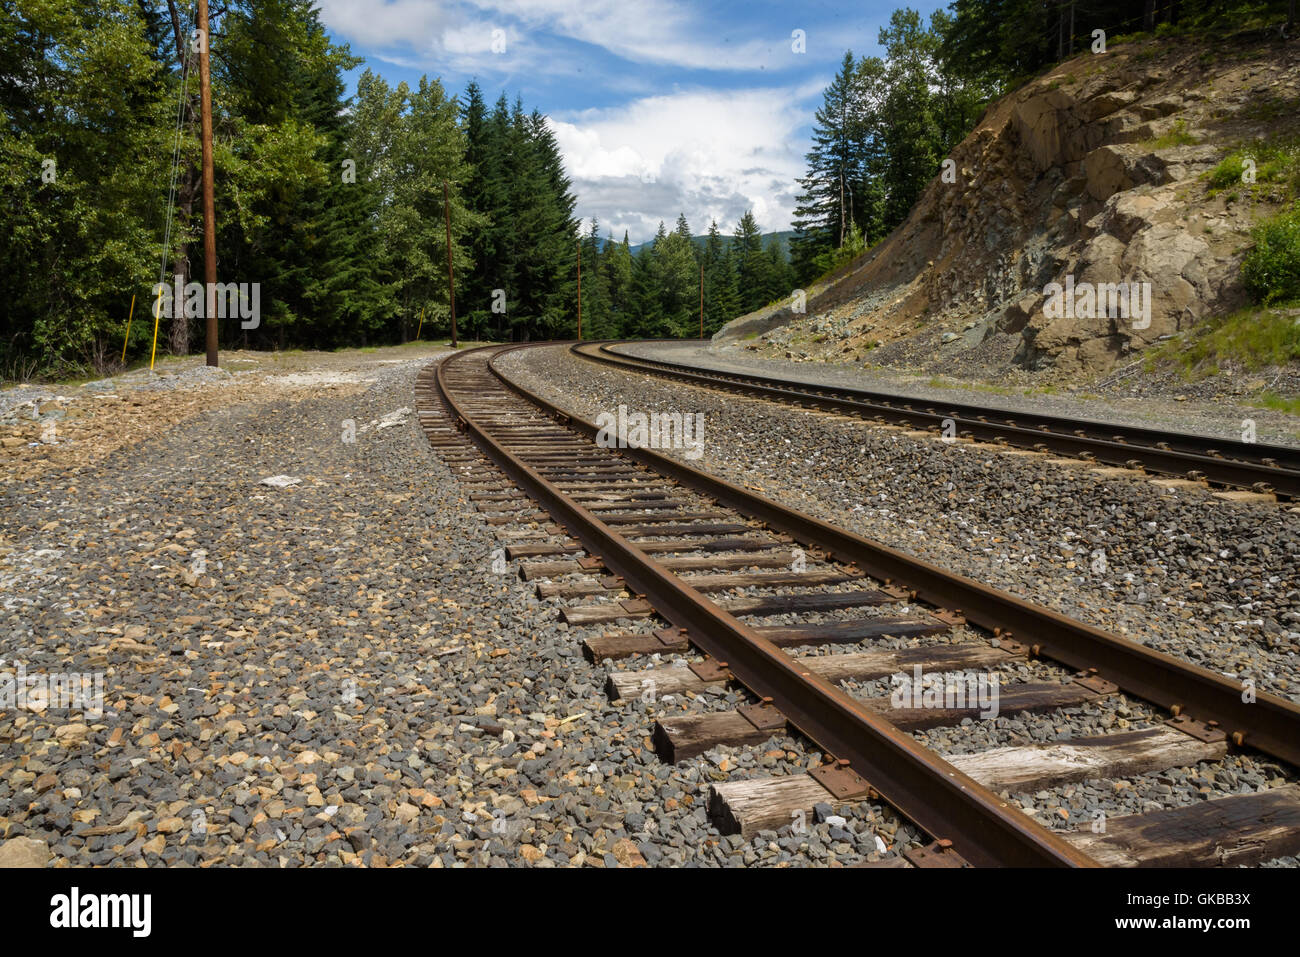 Two sets of train tracks curving into the landscape Stock Photo